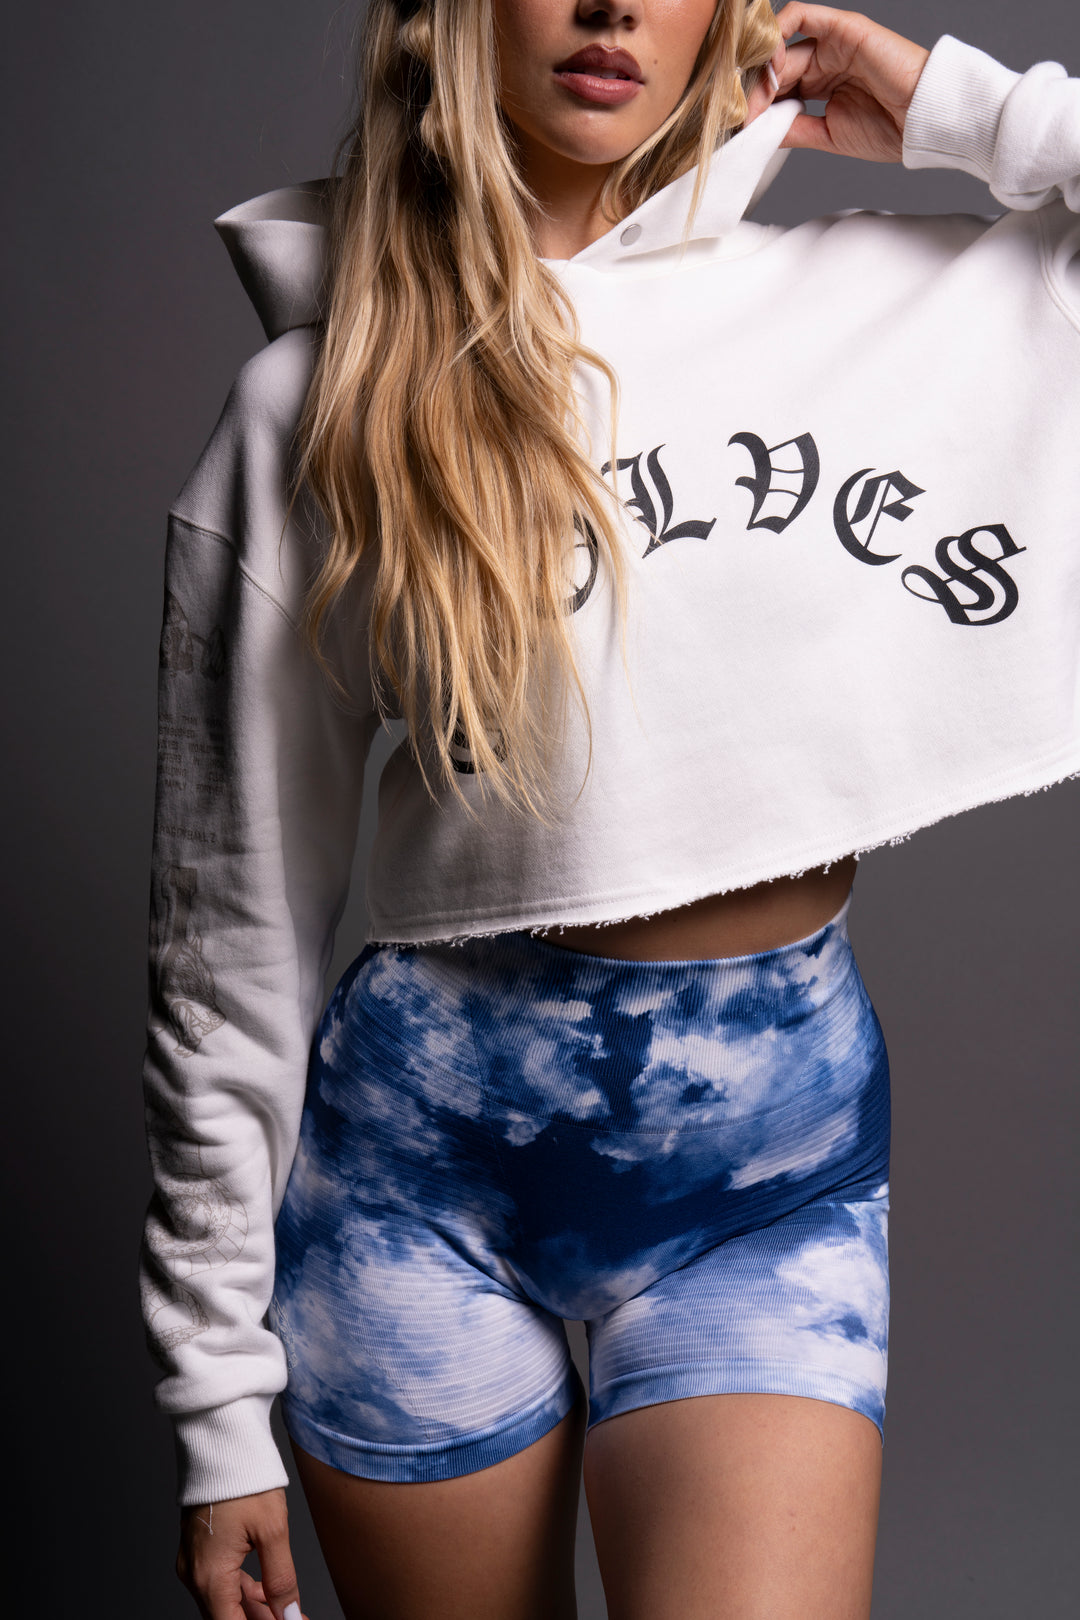 Our Wish "Pierce" (Cropped) Hoodie in Cream